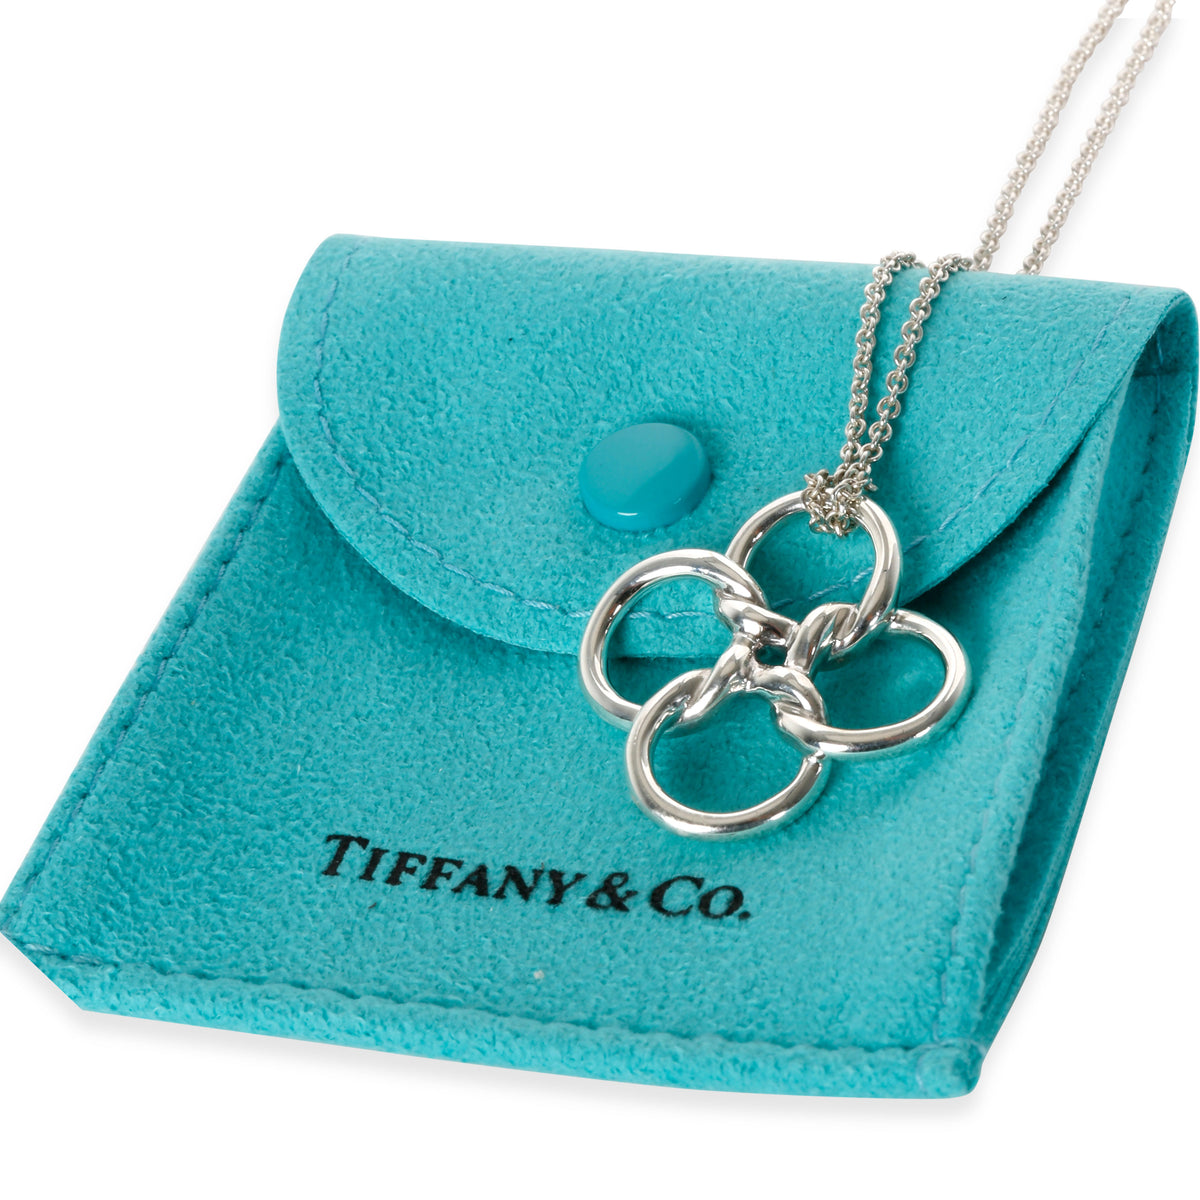 Tiffany & Co. Vintage Four Ring Knot Necklace in  Sterling Silver